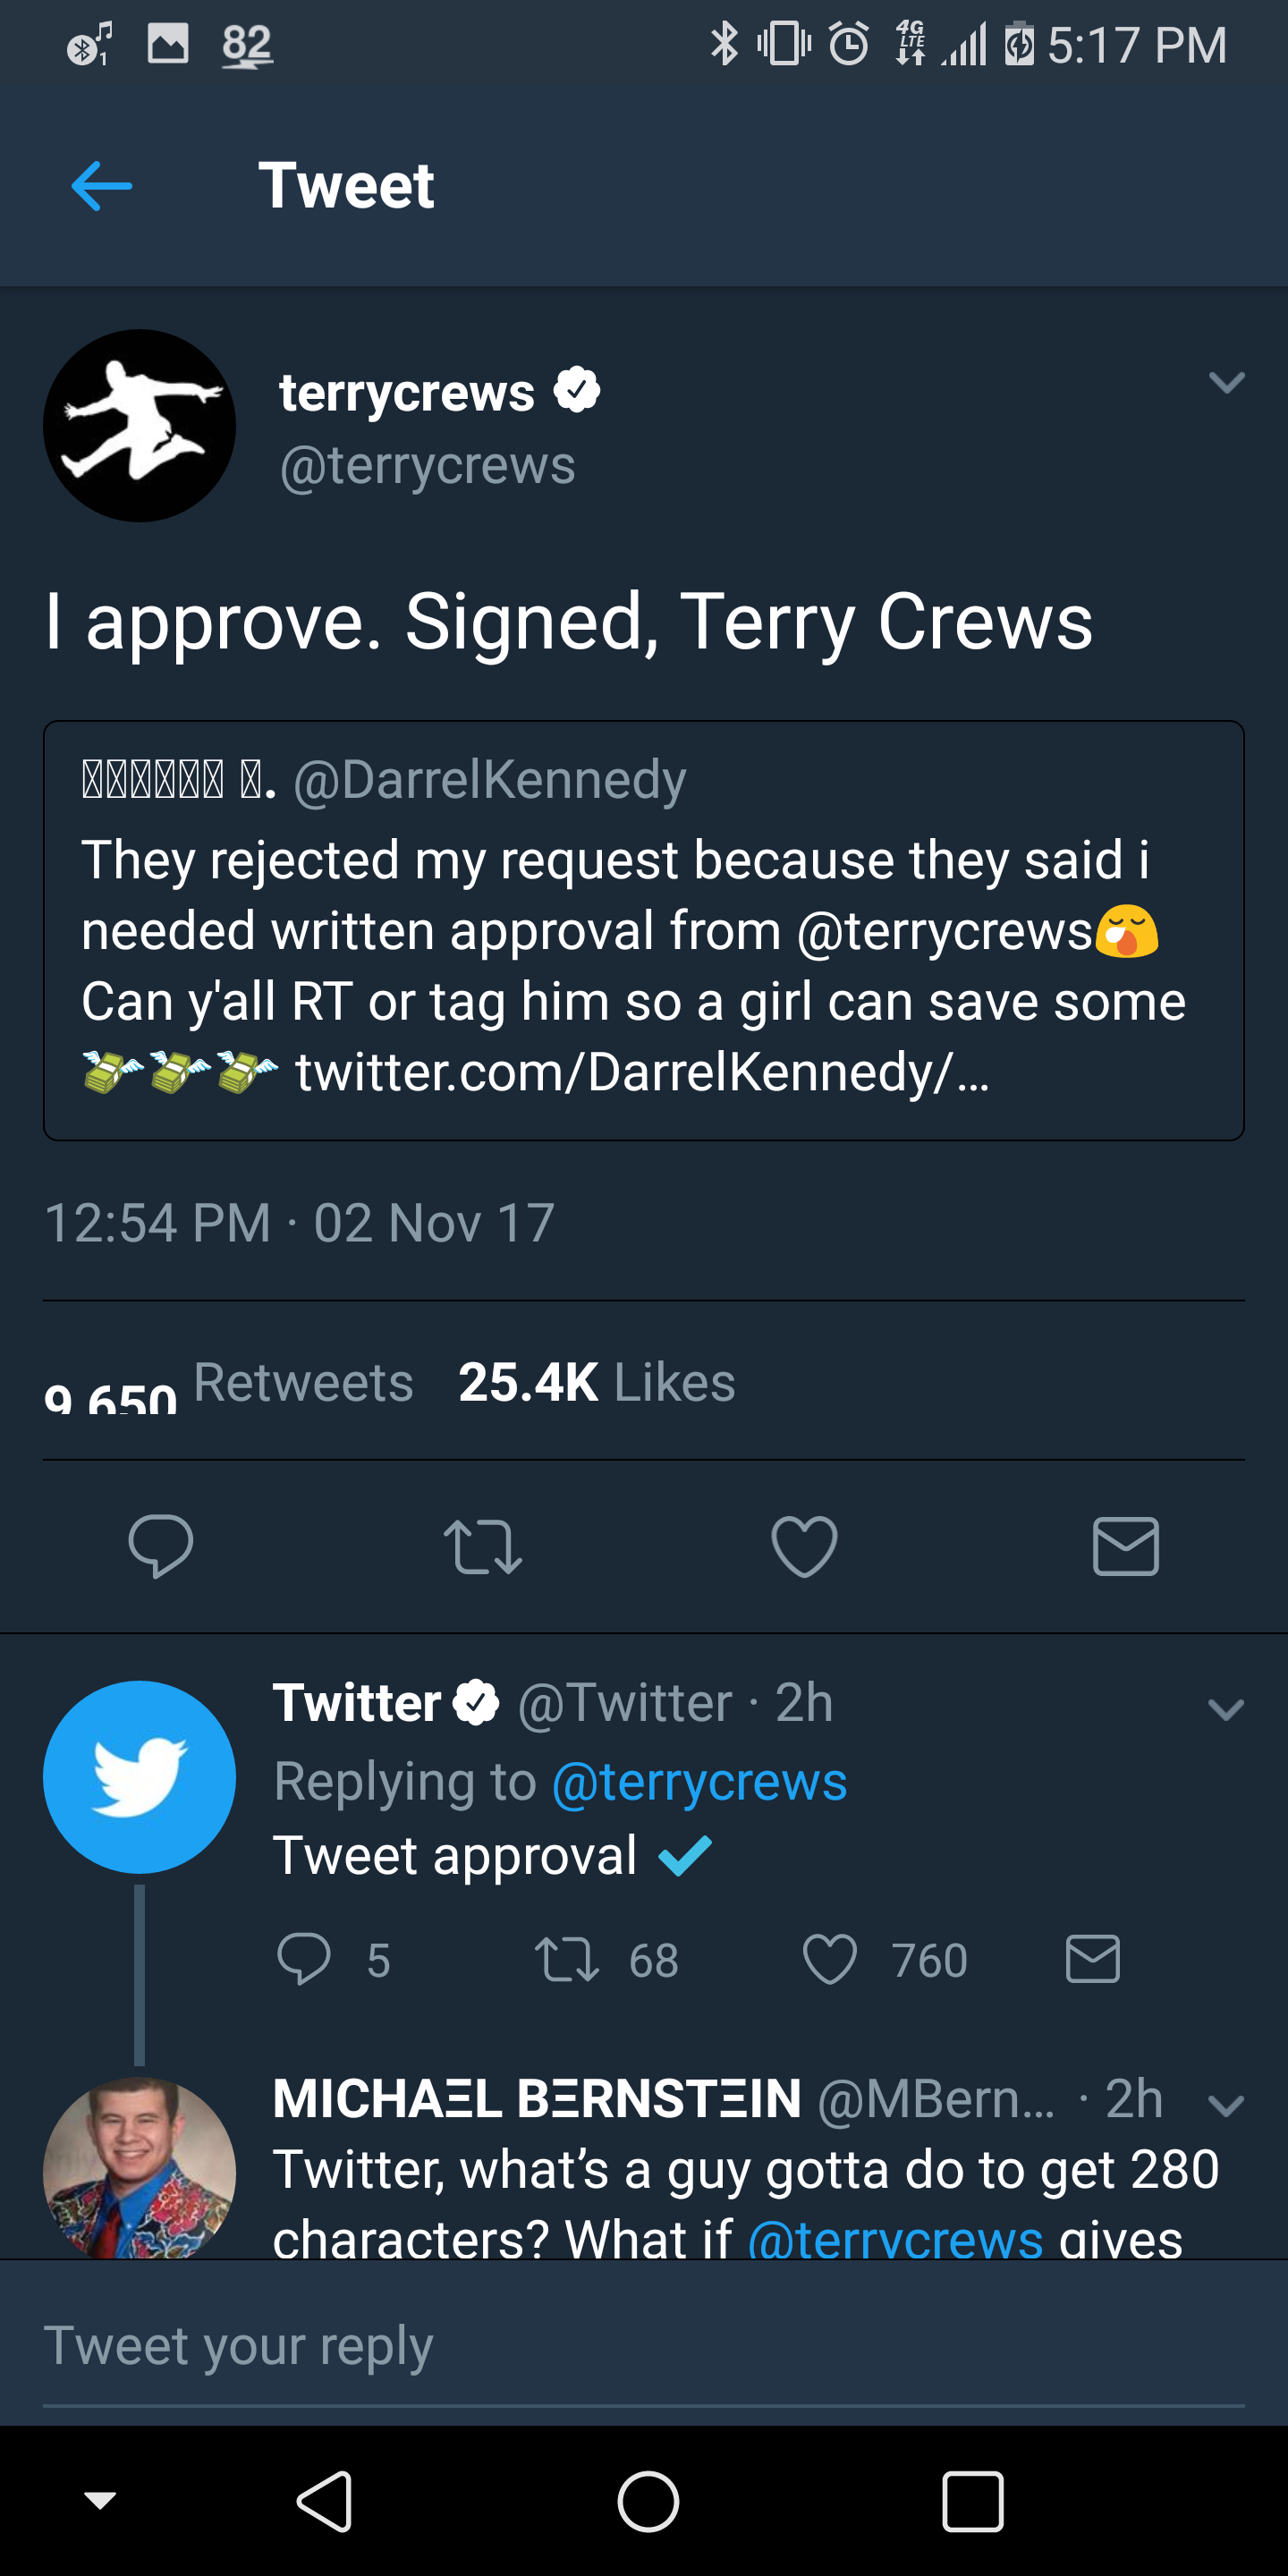 screenshot - 82 300 11 Tweet terrycrews I approve. Signed, Terry Crews 278 . They rejected my request because they said i needed written approval from Can y'all Rt or tag him so a girl can save some twitter.comDarrelKennedy... Twitter Twitter 2h Tweet app